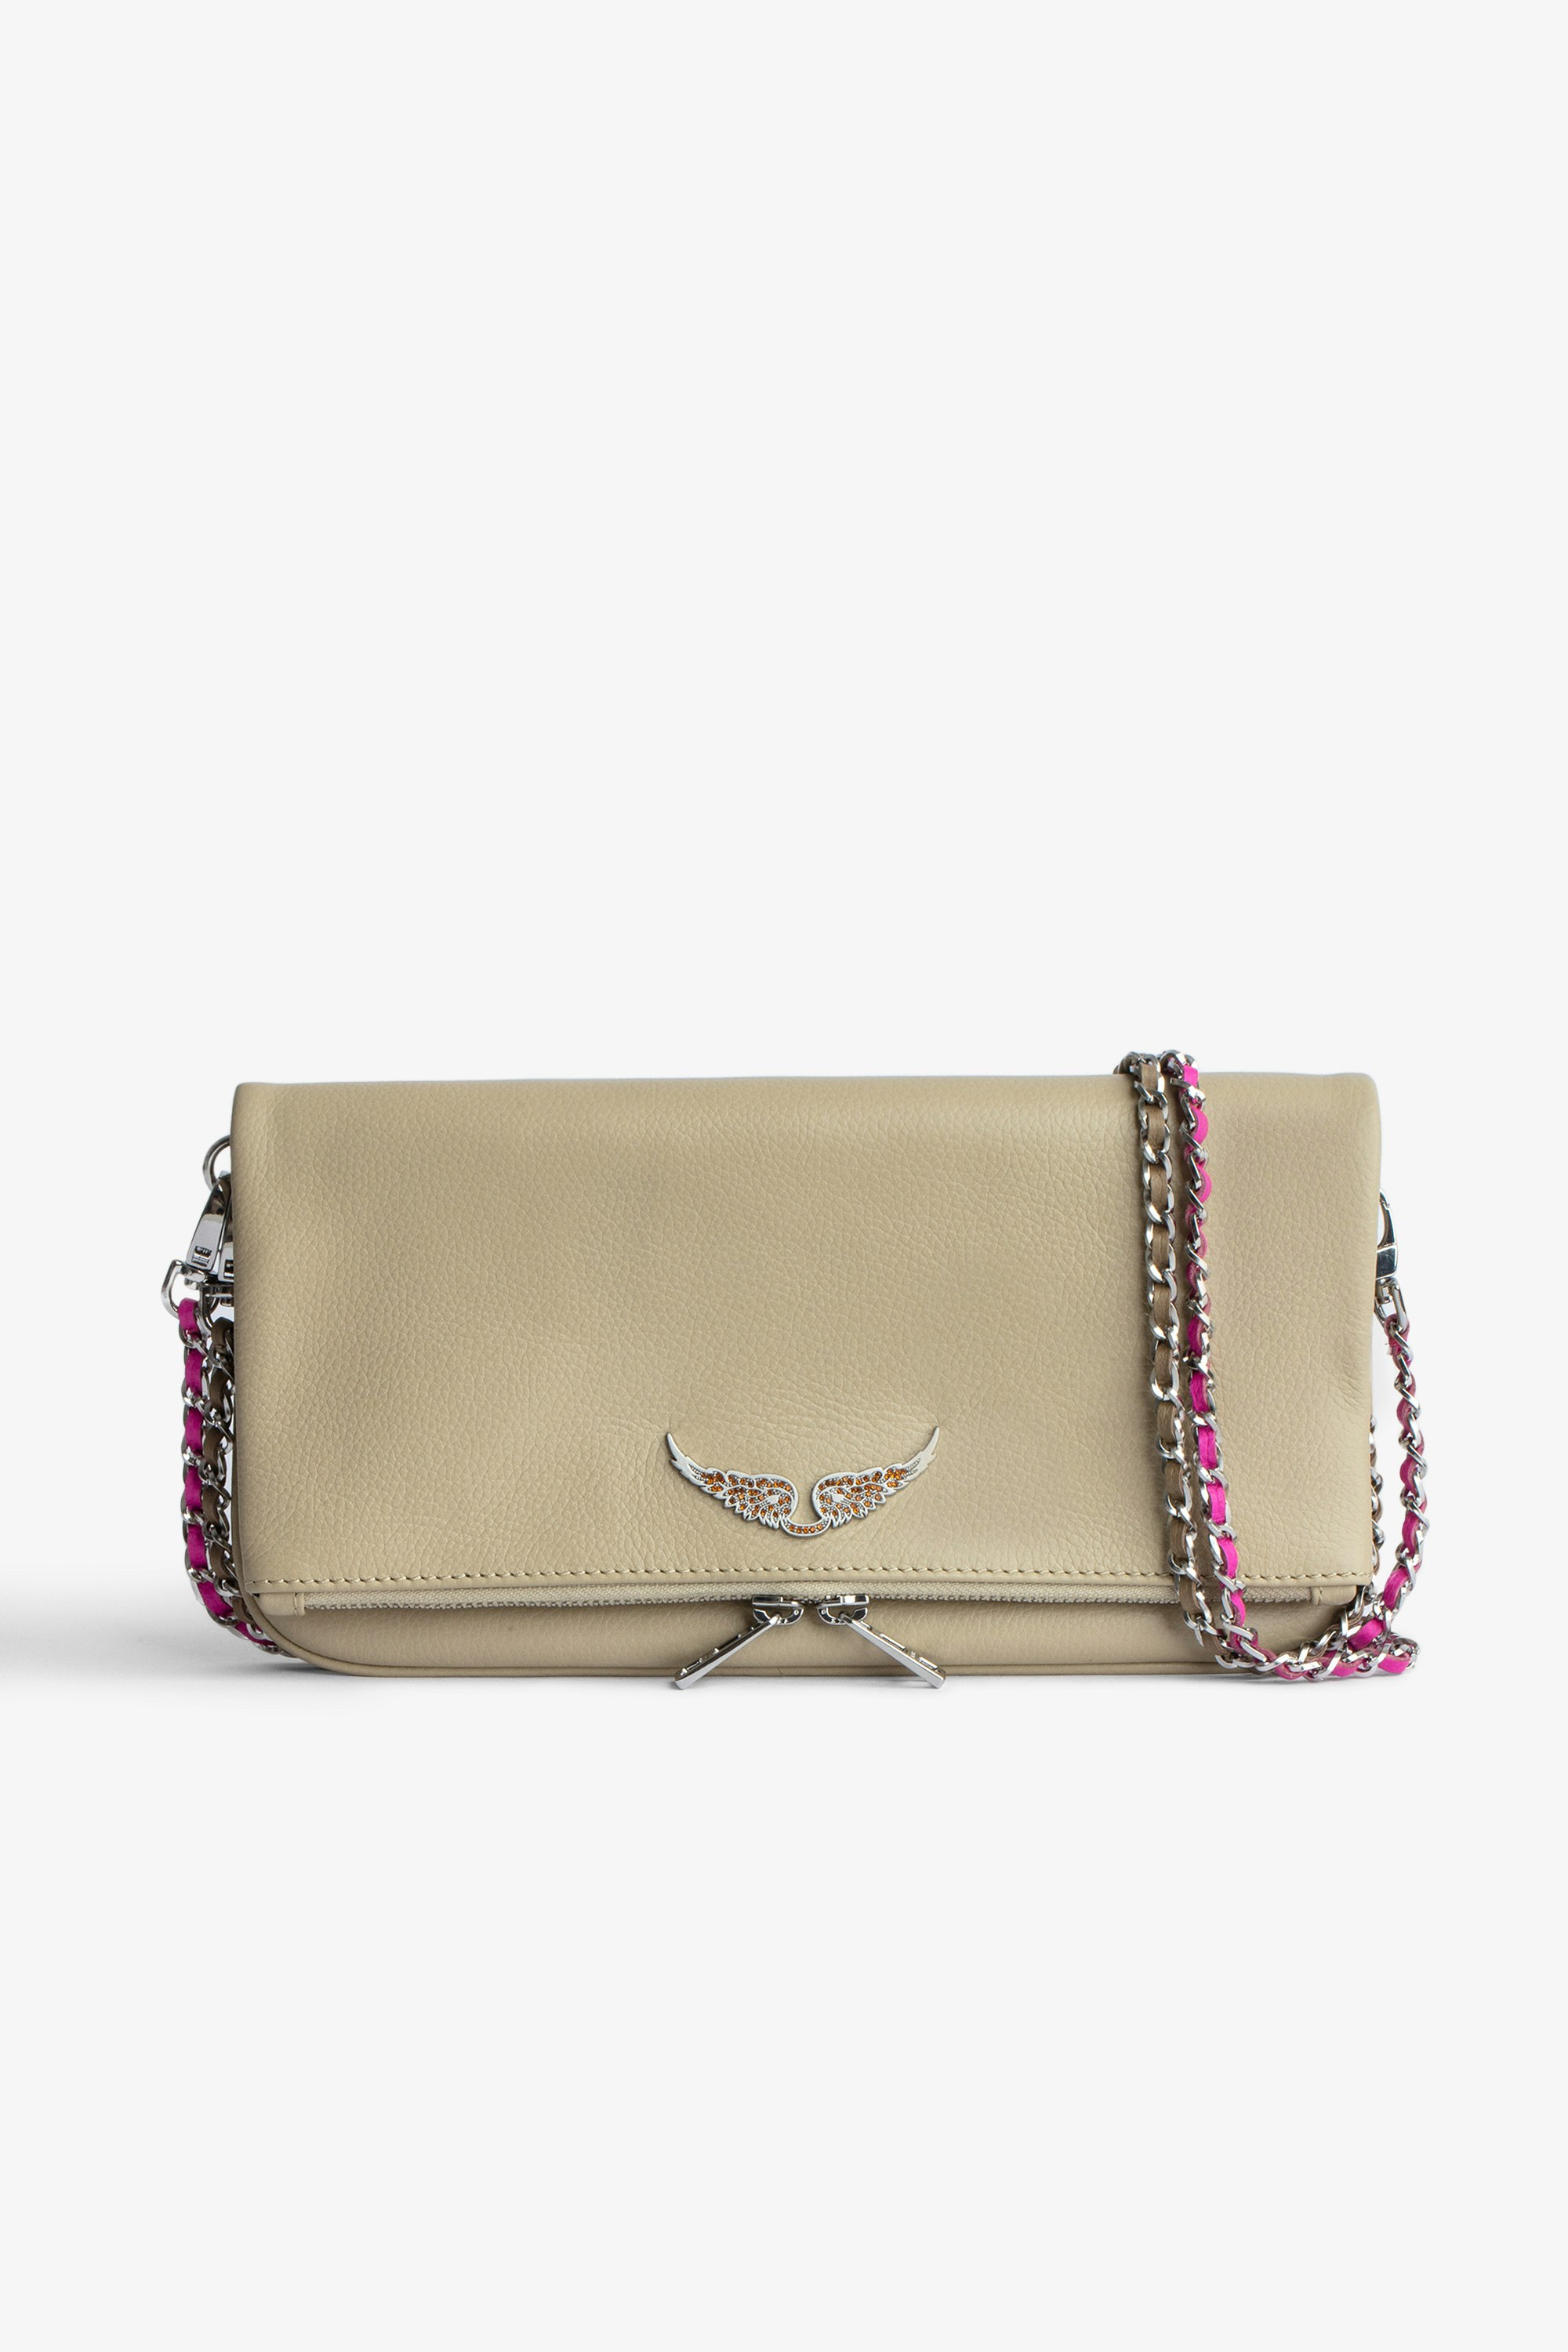 Rock Clutch Women’s beige leather zipped clutch with leather and chain shoulder strap